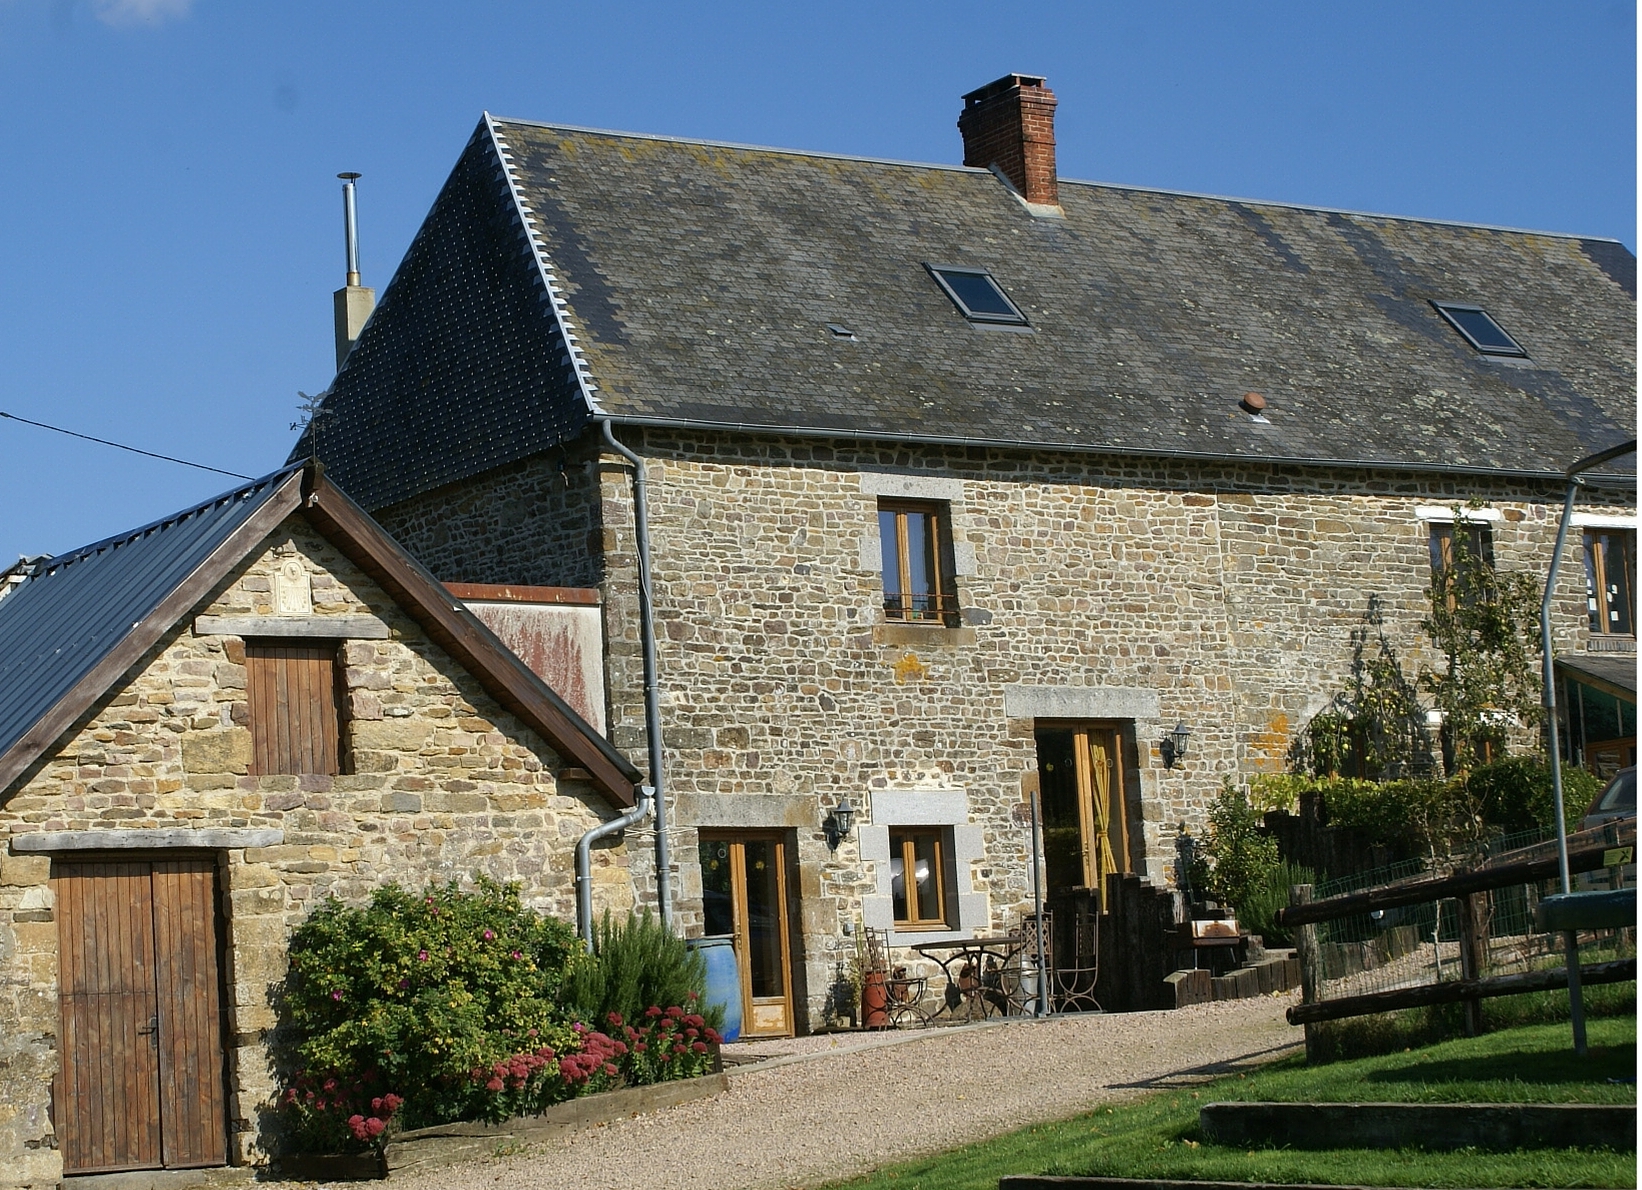 Eco-Gites of Lenault, a holiday cottage in Normandy